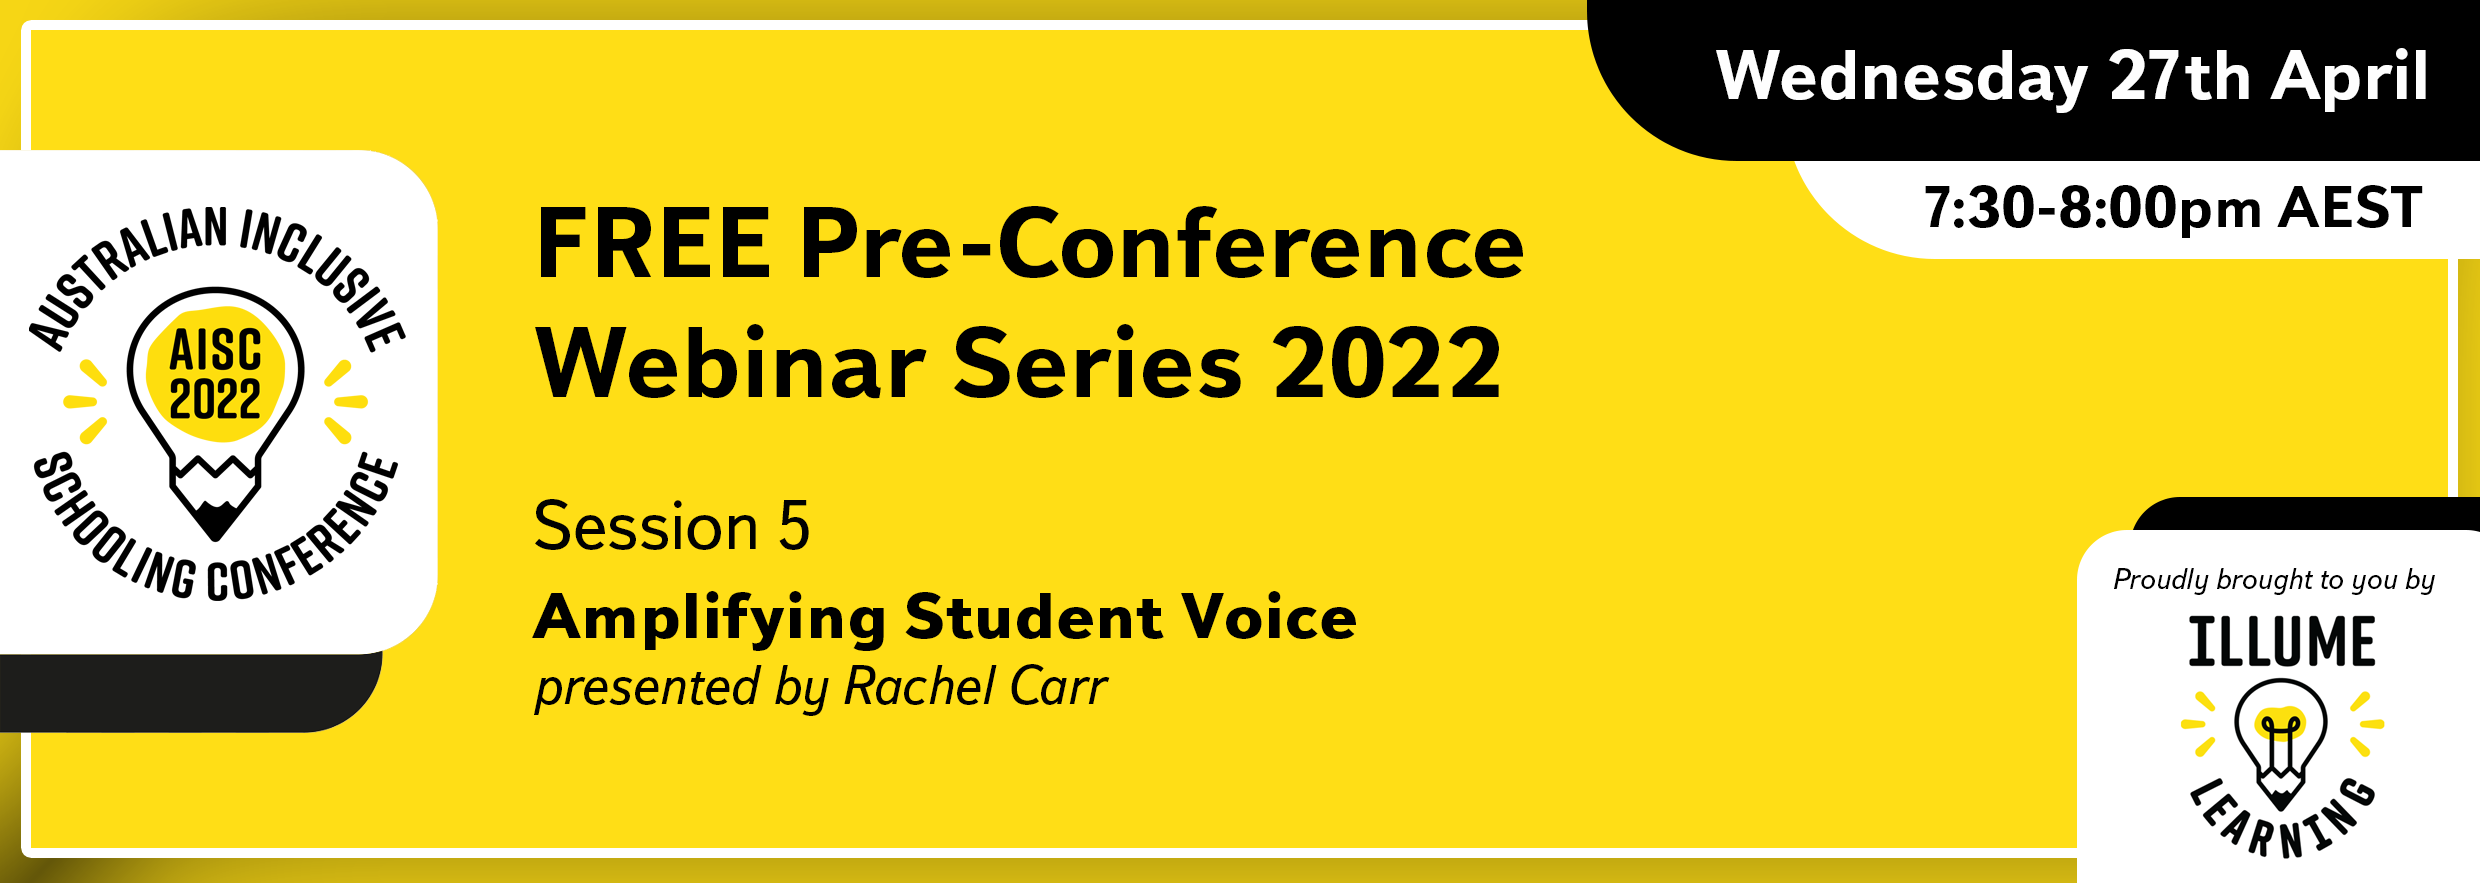 Image Description: Black text on a yellow background reads 'Australian Inclusive Schooling Conference, 'FREE Pre-conference Webinar Series 2022. Session 5. Amplifying Student Voice. presented by Rachel Carr. Wednesday 2nd March 7:30-8:00pm AEST. Proudly brought to you by Illume Learning'